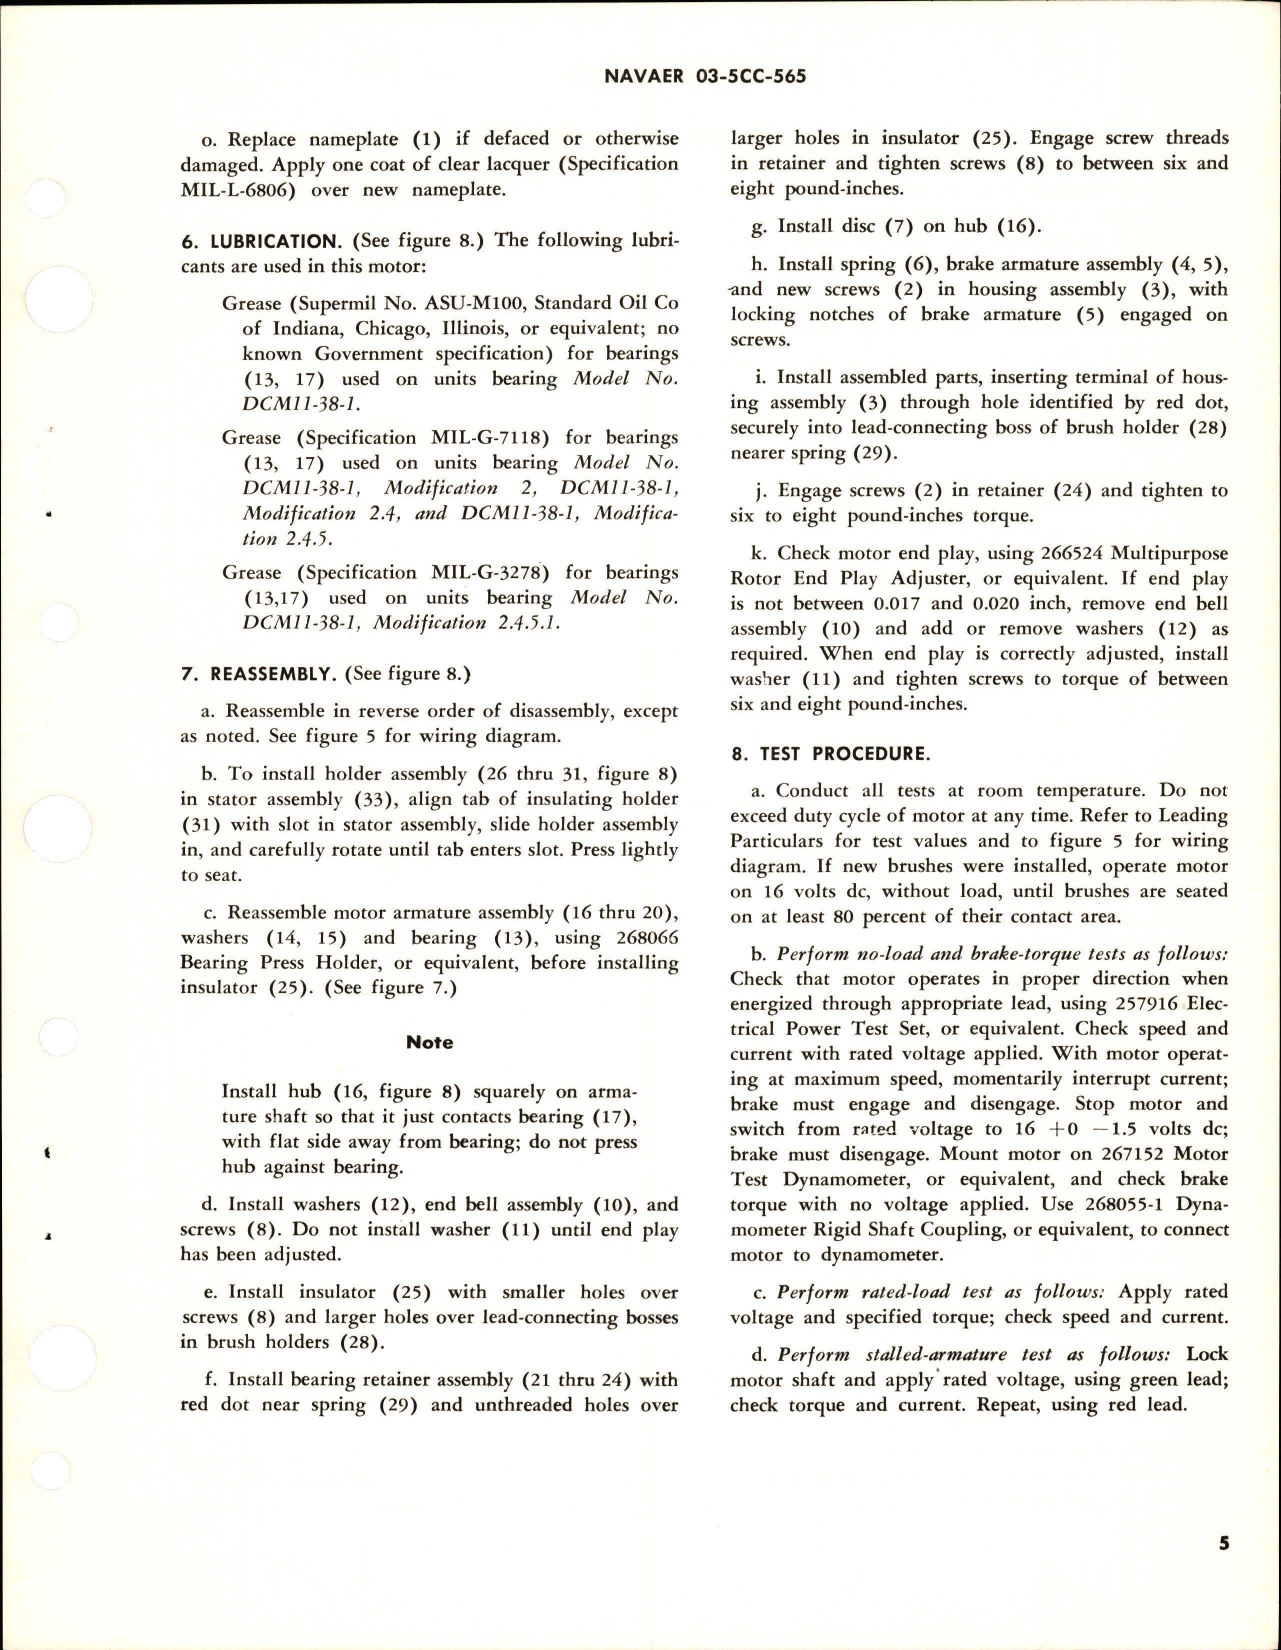 Sample page 5 from AirCorps Library document: Overhaul Instructions with Parts Breakdown for Direct Current Motor - Part 36886 - Model DCM11-38-1